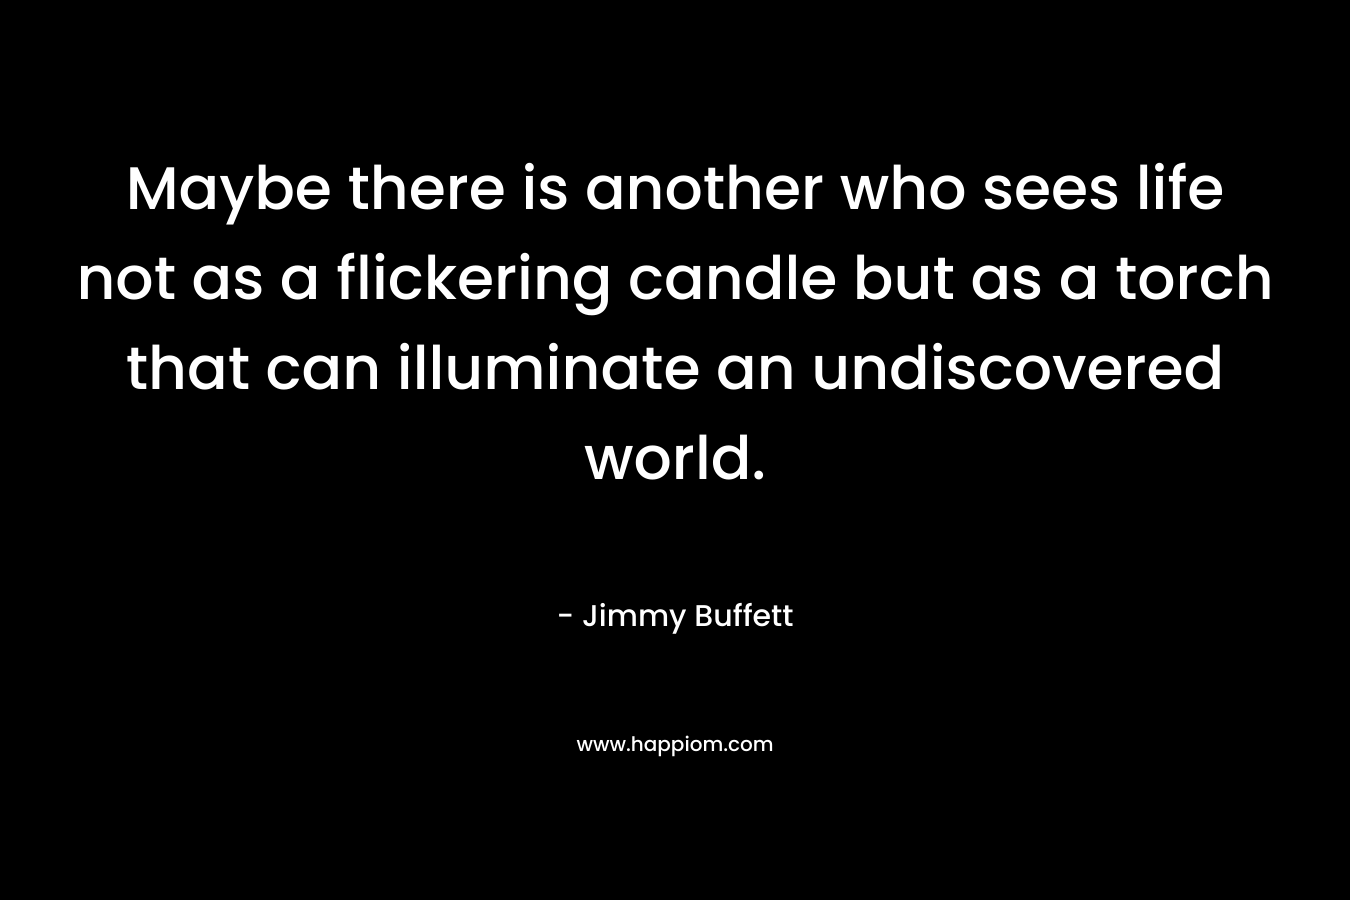 Maybe there is another who sees life not as a flickering candle but as a torch that can illuminate an undiscovered world. – Jimmy Buffett